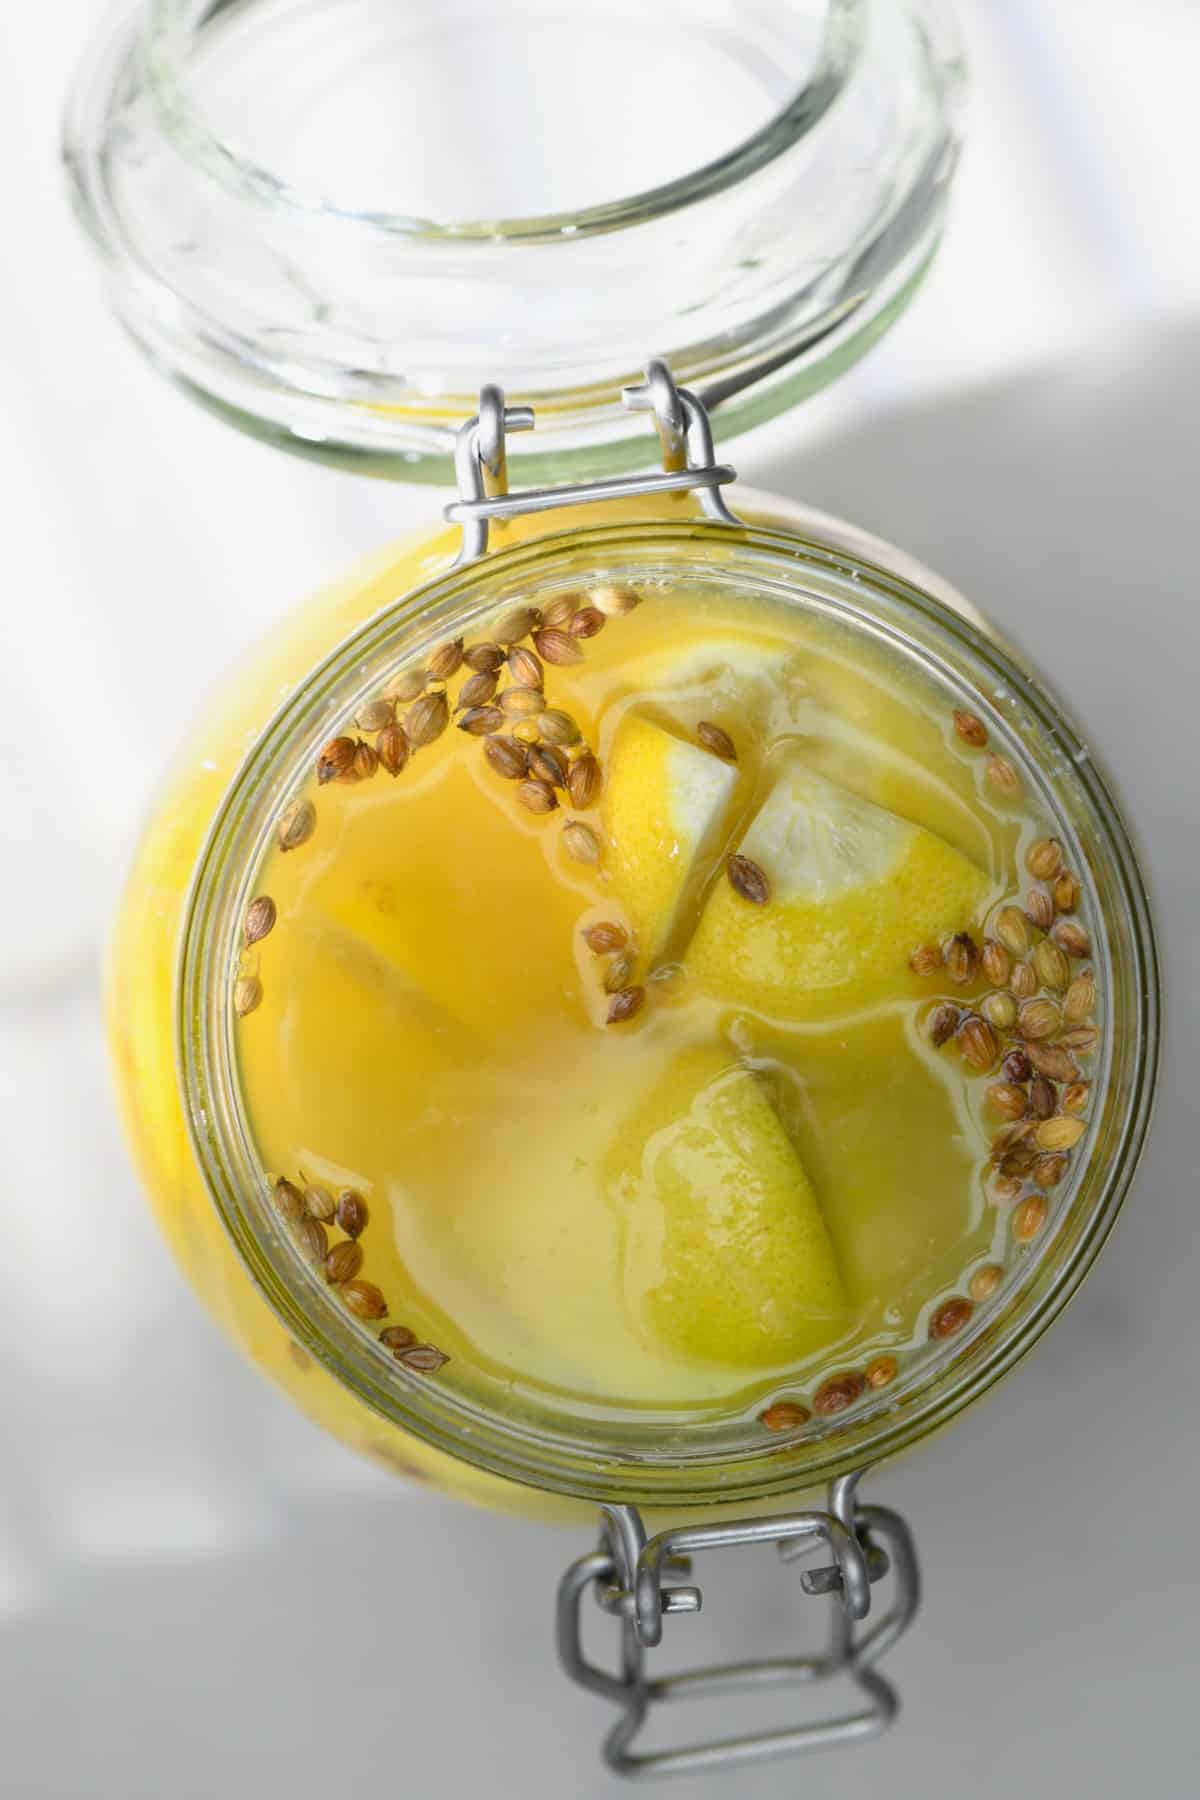 Top view of jar with preserved lemons